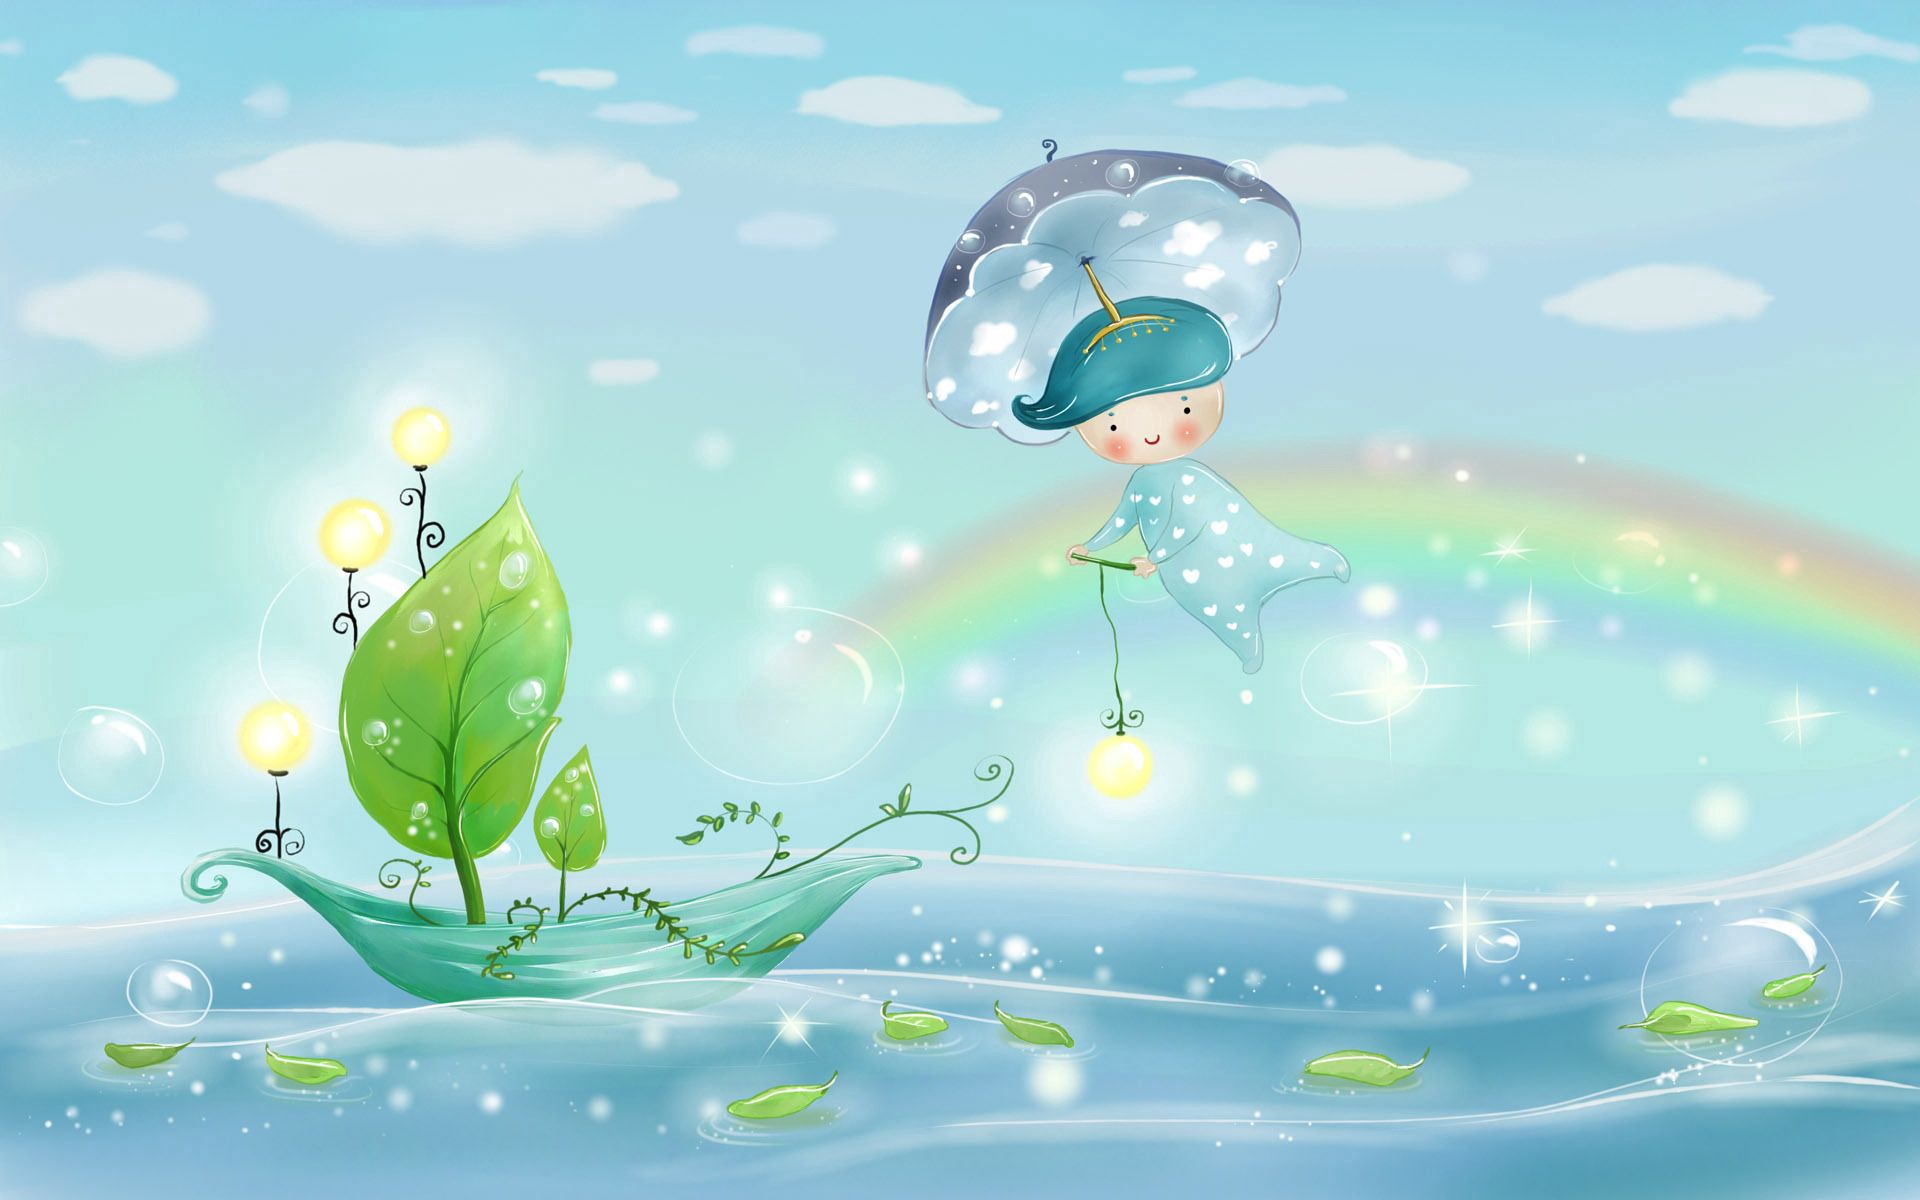 drawing, bubbles, vector, rain, picture, boat, lanterns, nature, water, sky, leaves, sea, clouds, rainbow, lights, shine, light, sail, umbrella, boy, weather